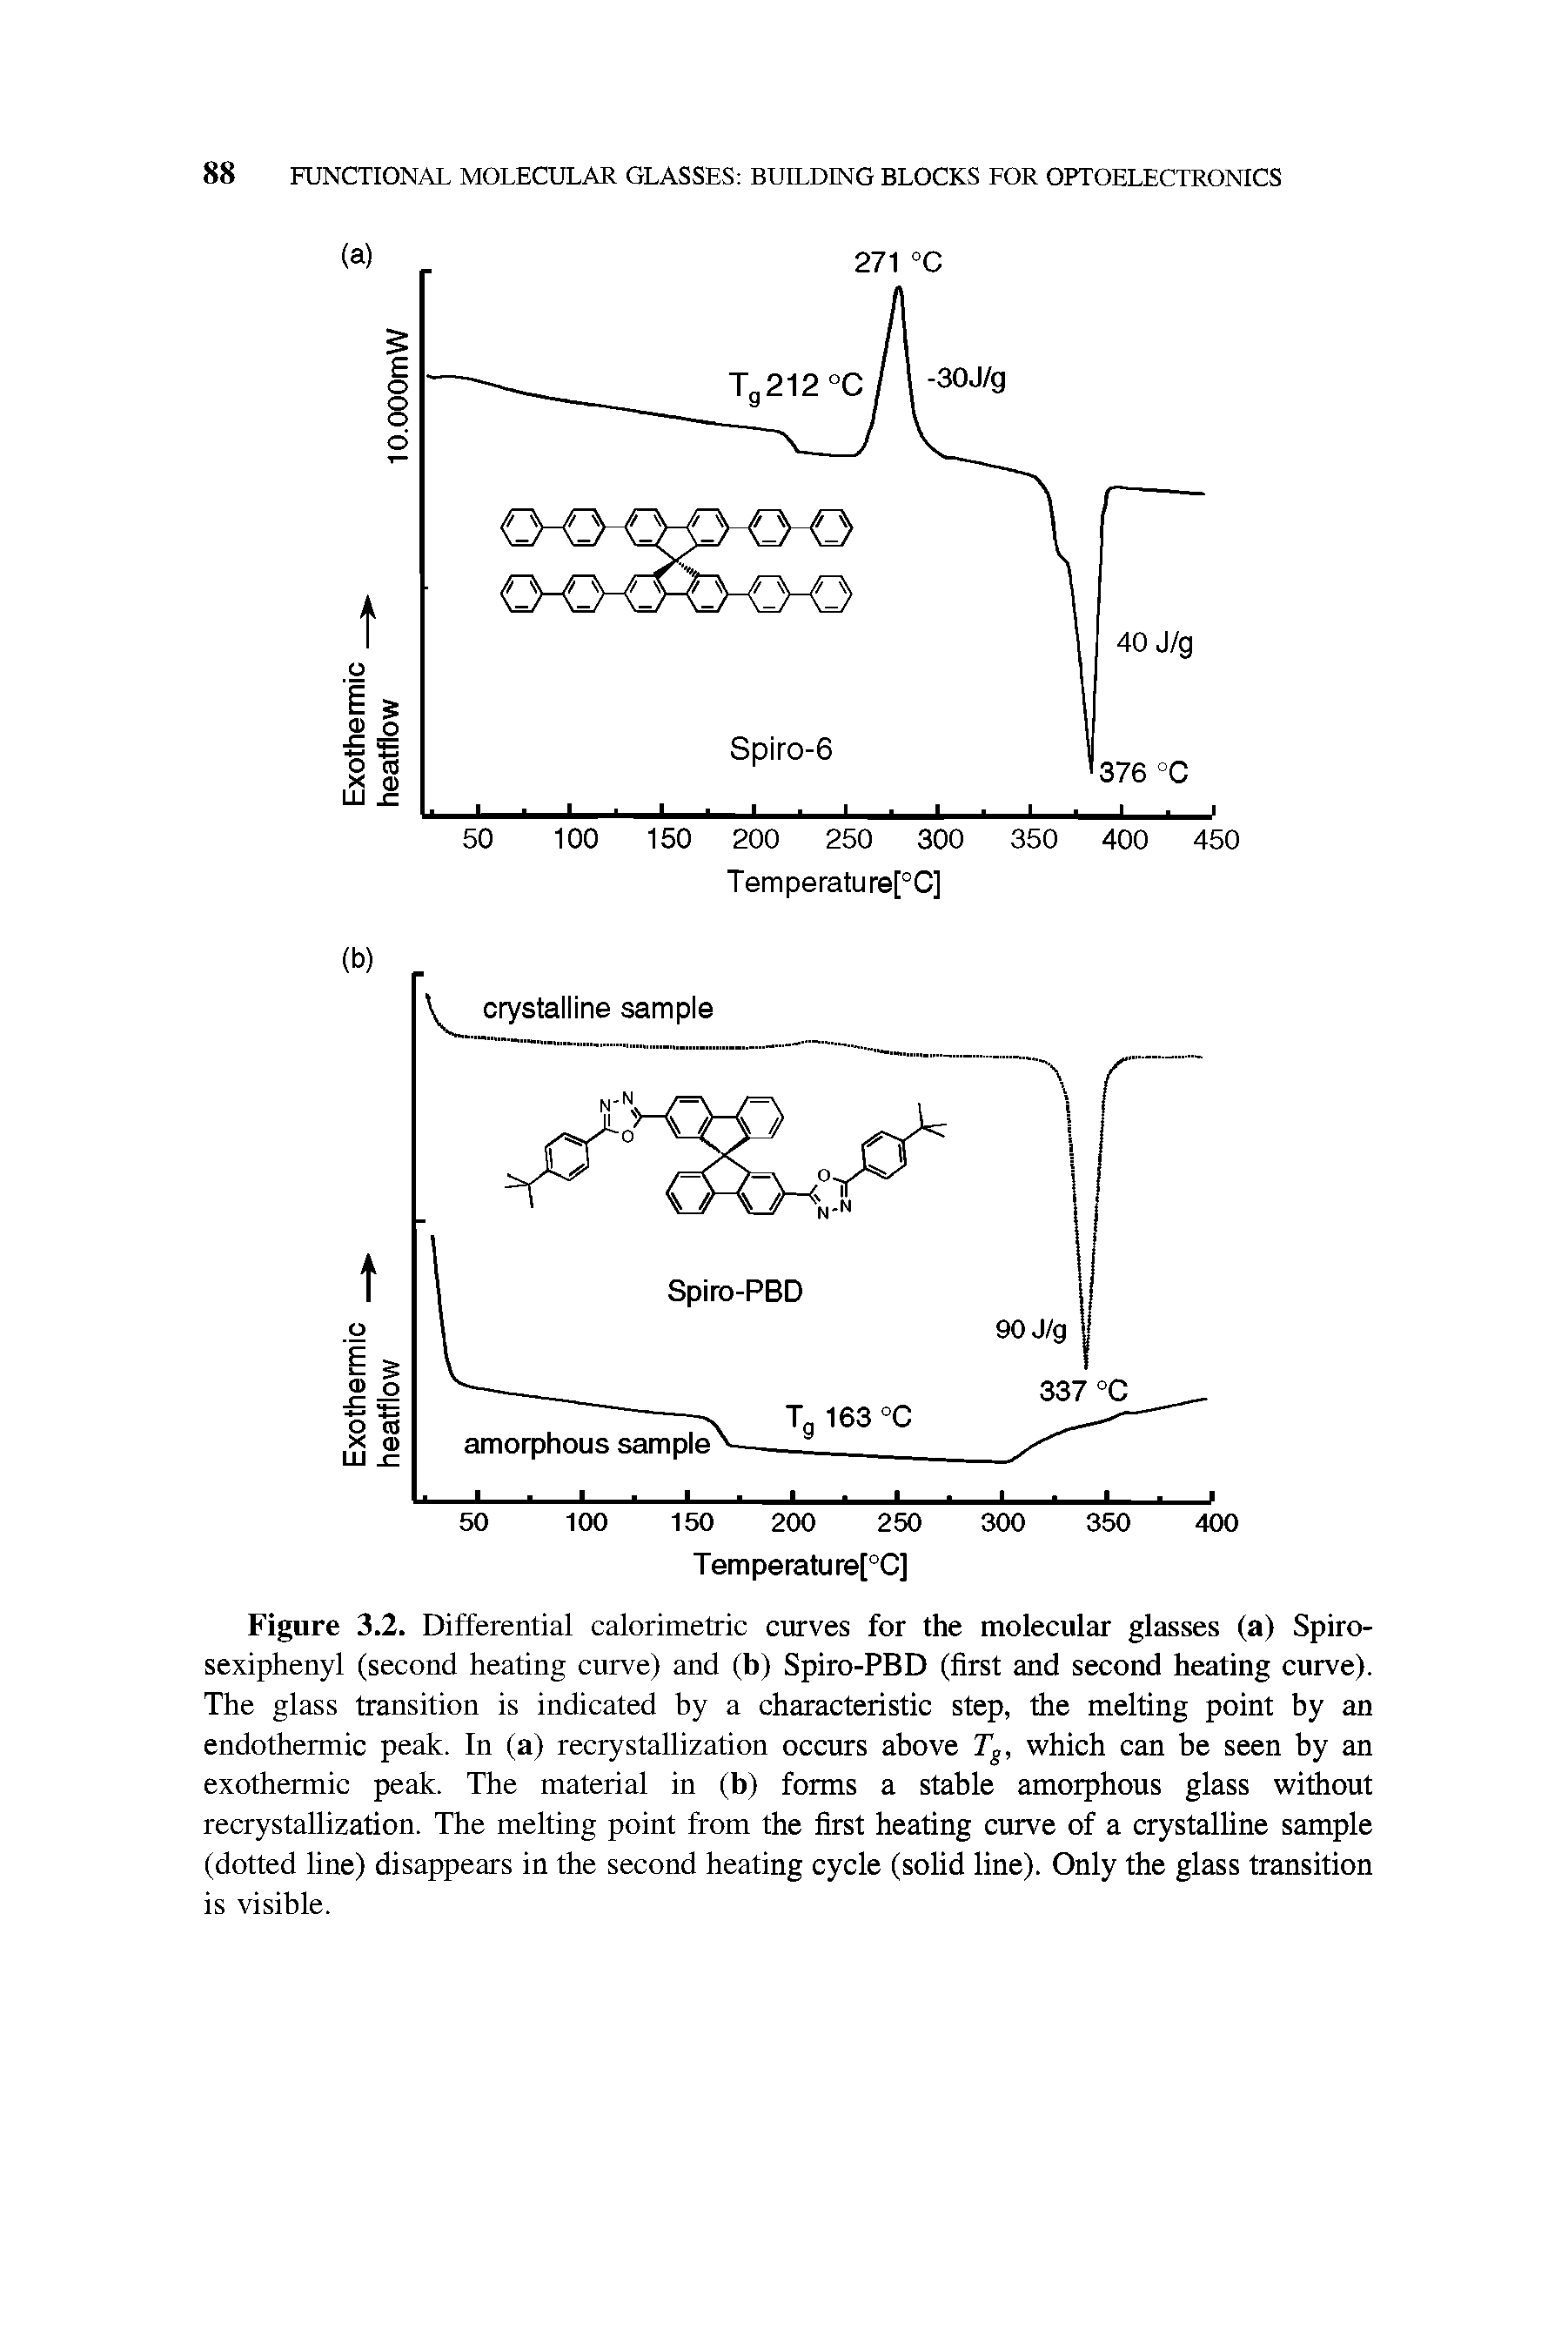 Figure 3.2. Differential calorimetric curves for the molecular glasses (a) Spiro-sexiphenyl (second heating curve) and (b) Spiro-PBD (first and second heating curve). The glass transition is indicated by a characteristic step, the melting point by an endothermic peak. In (a) recrystallization occurs above Tg, which can be seen by an exothermic peak. The material in (b) forms a stable amorphous glass without recrystallization. The melting point from the first heating curve of a crystalline sample (dotted line) disappears in the second heating cycle (solid line). Only the glass transition is visible.